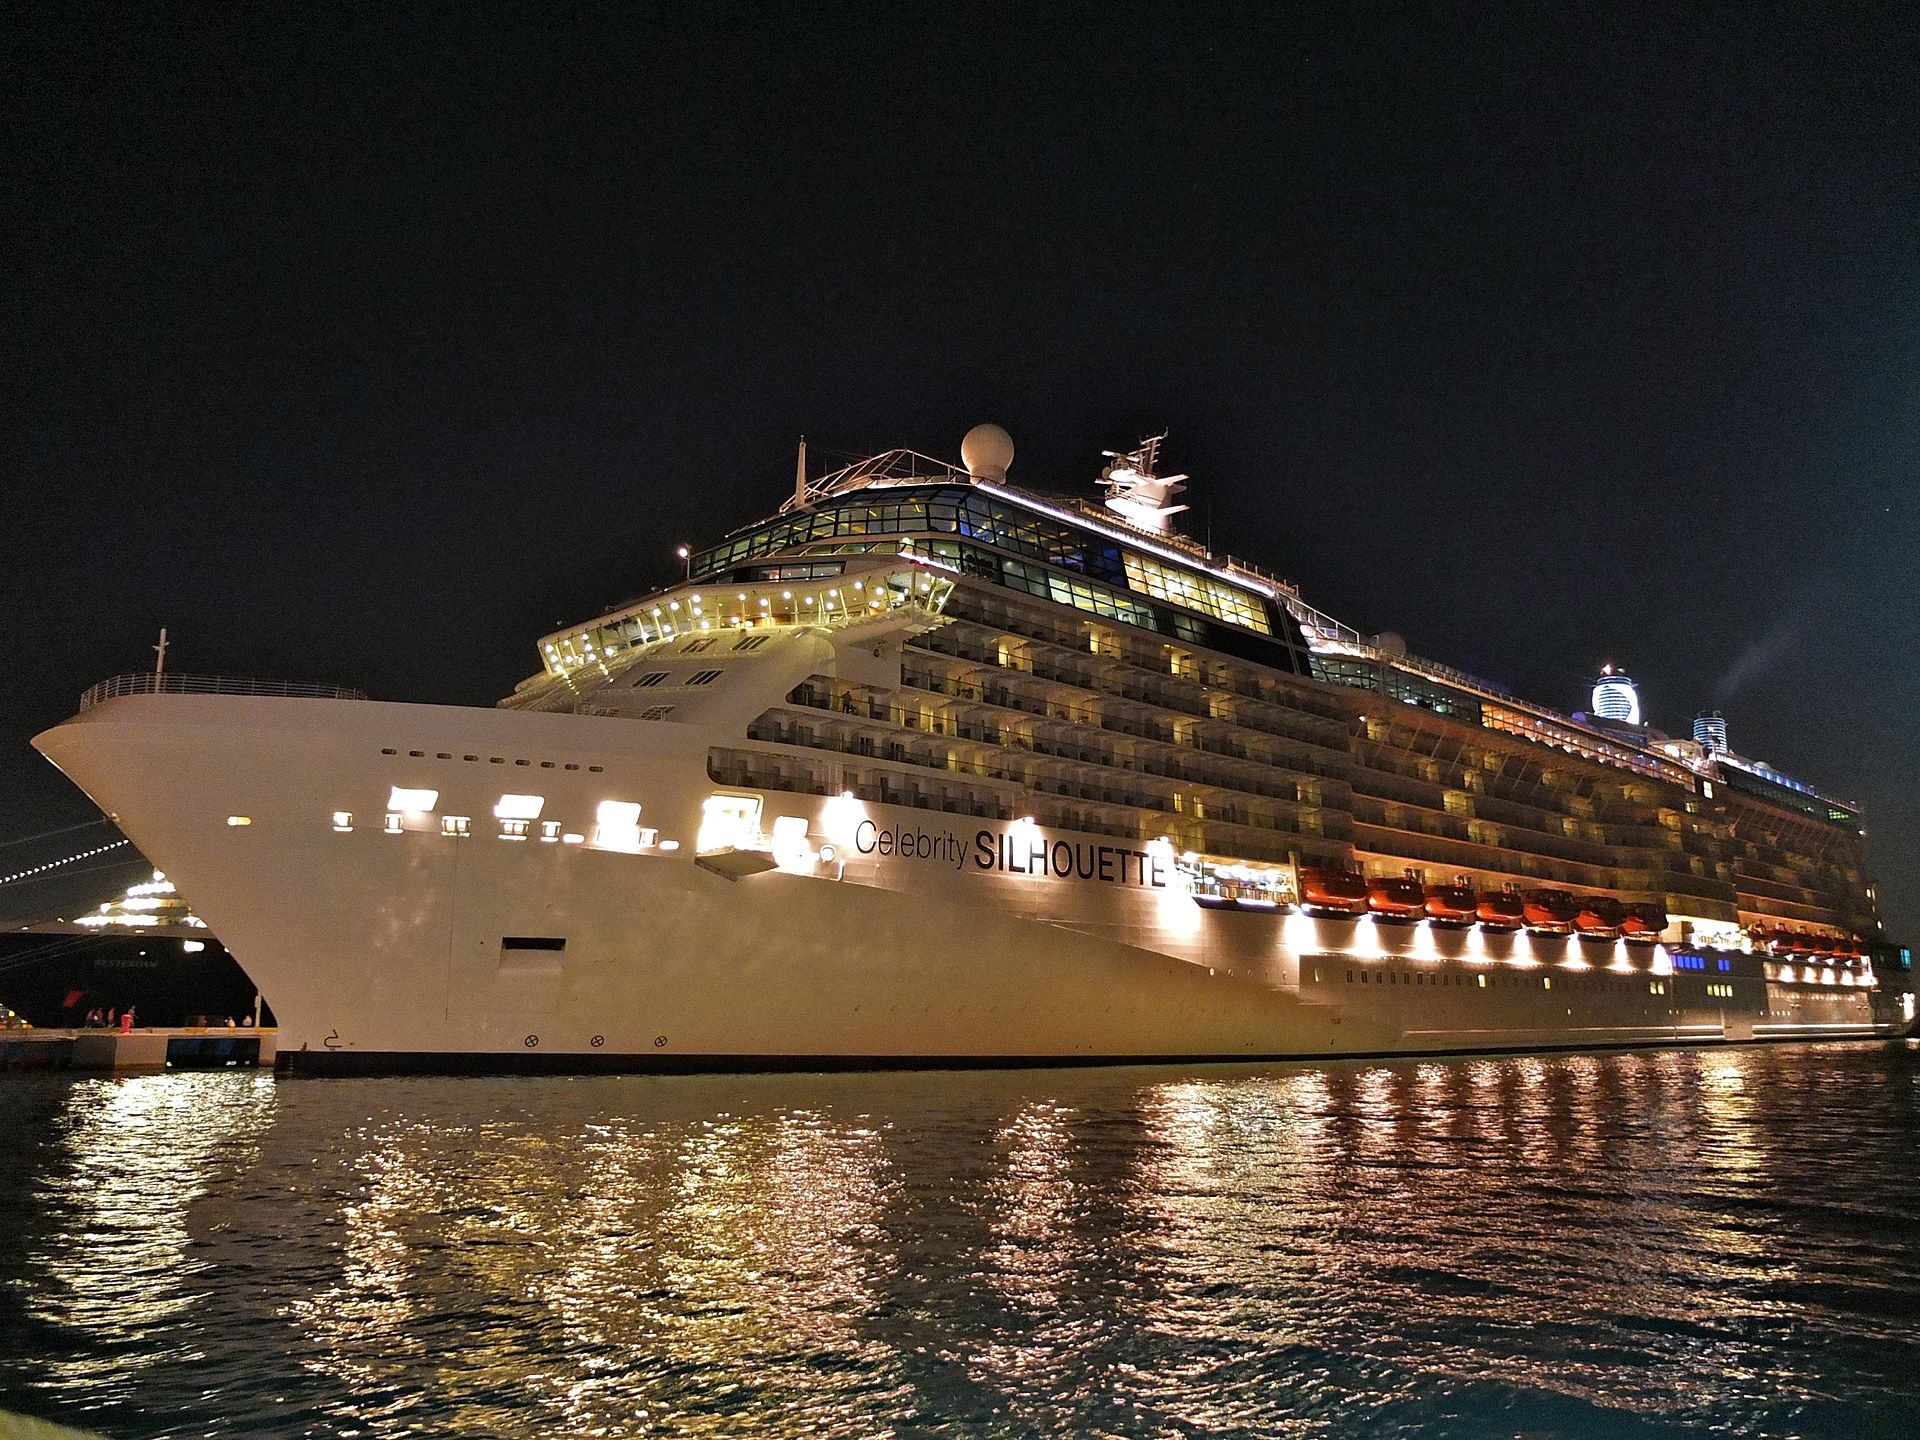 Celebrity Silhouette cruise ship at night